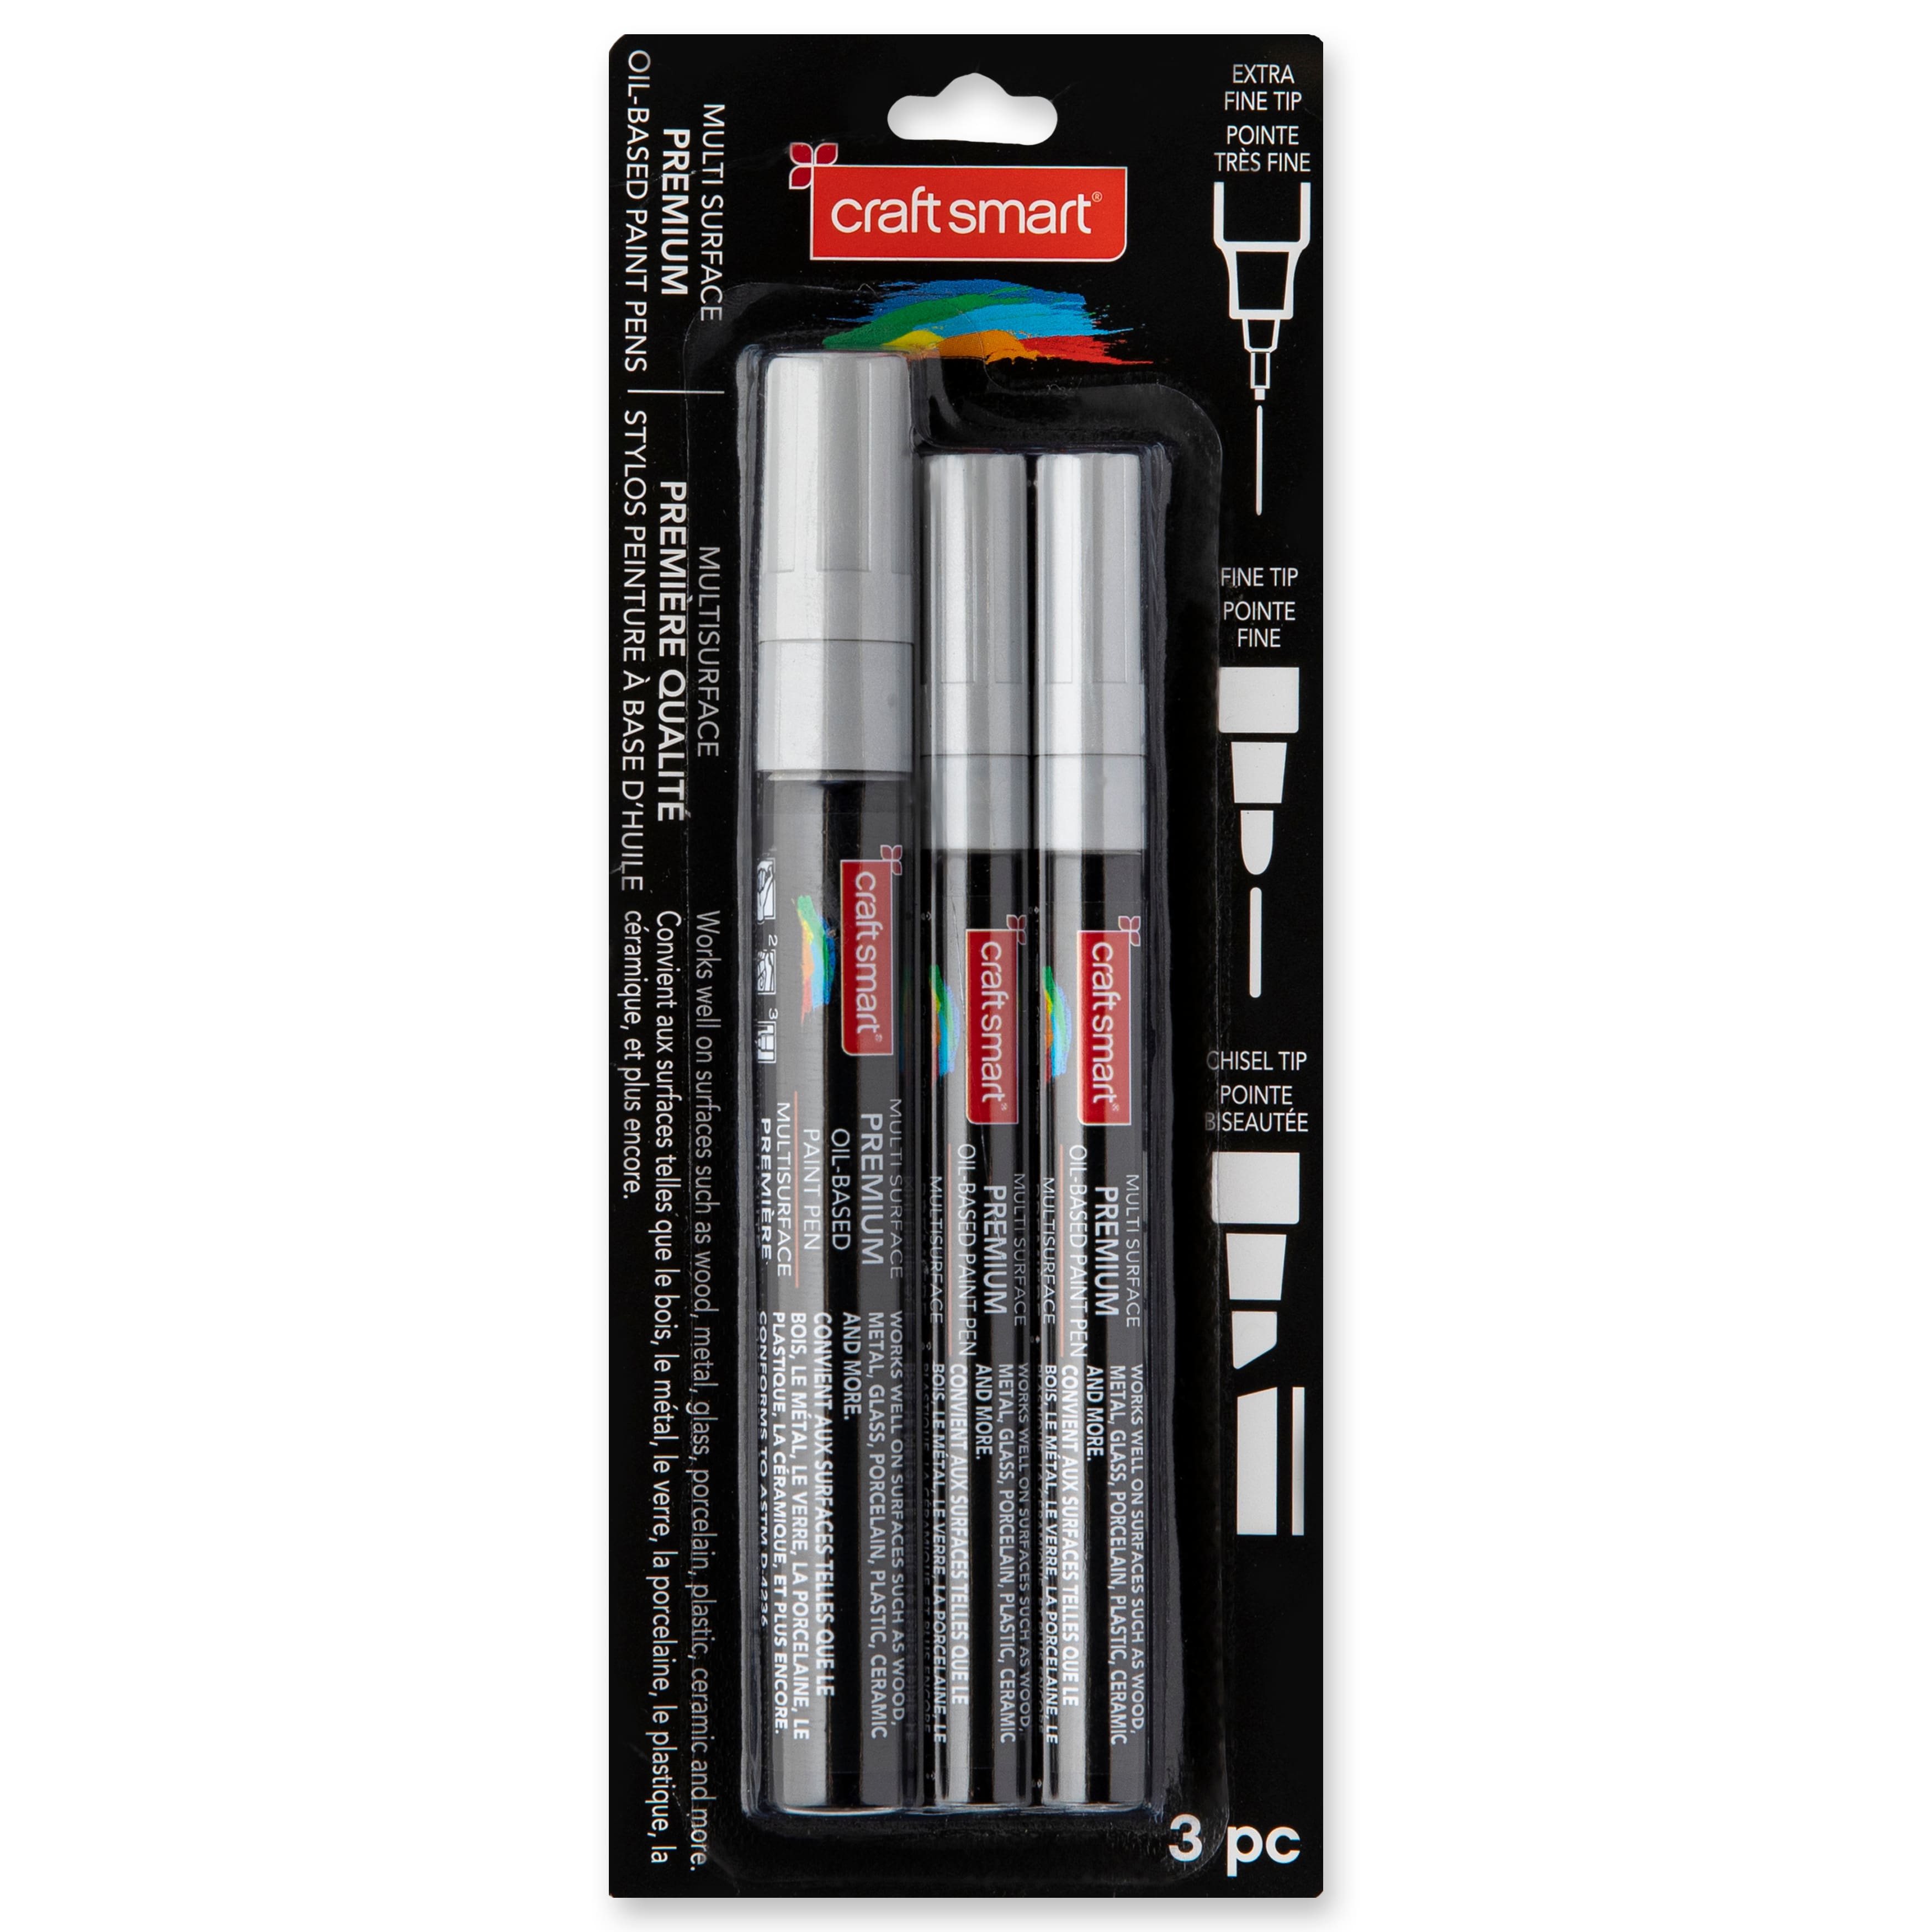 Premium Broad Tip Matte Water-Based Paint Pen by Craft Smart®